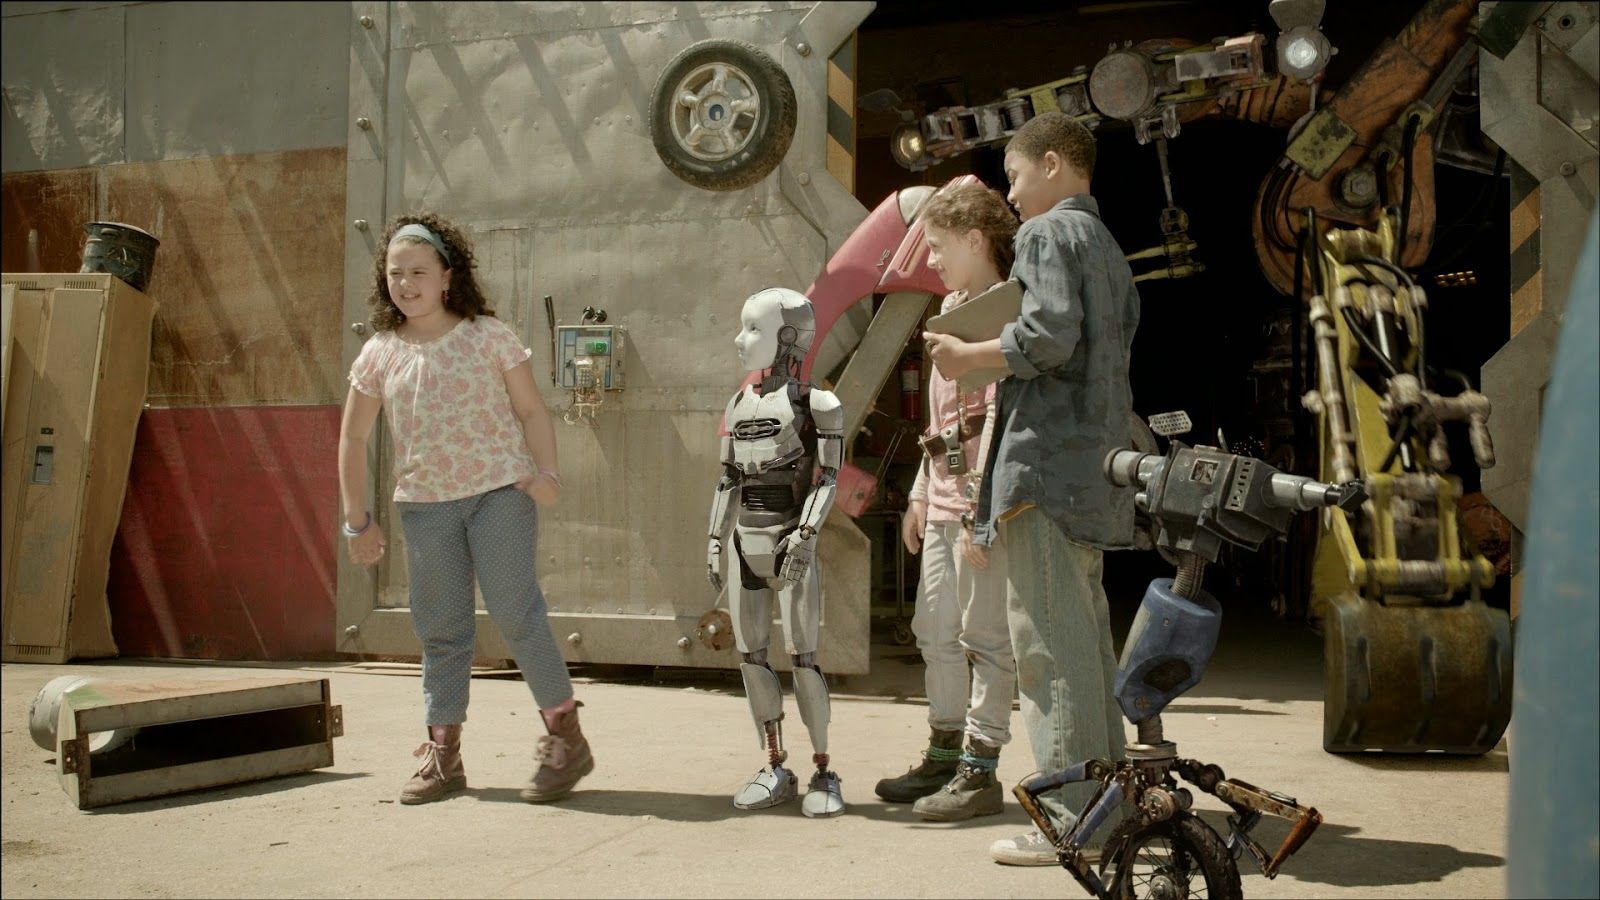 Amazon Studios' Annedroids Let the Kids Learn Science While Getting Entertained Time Mom and Losing It